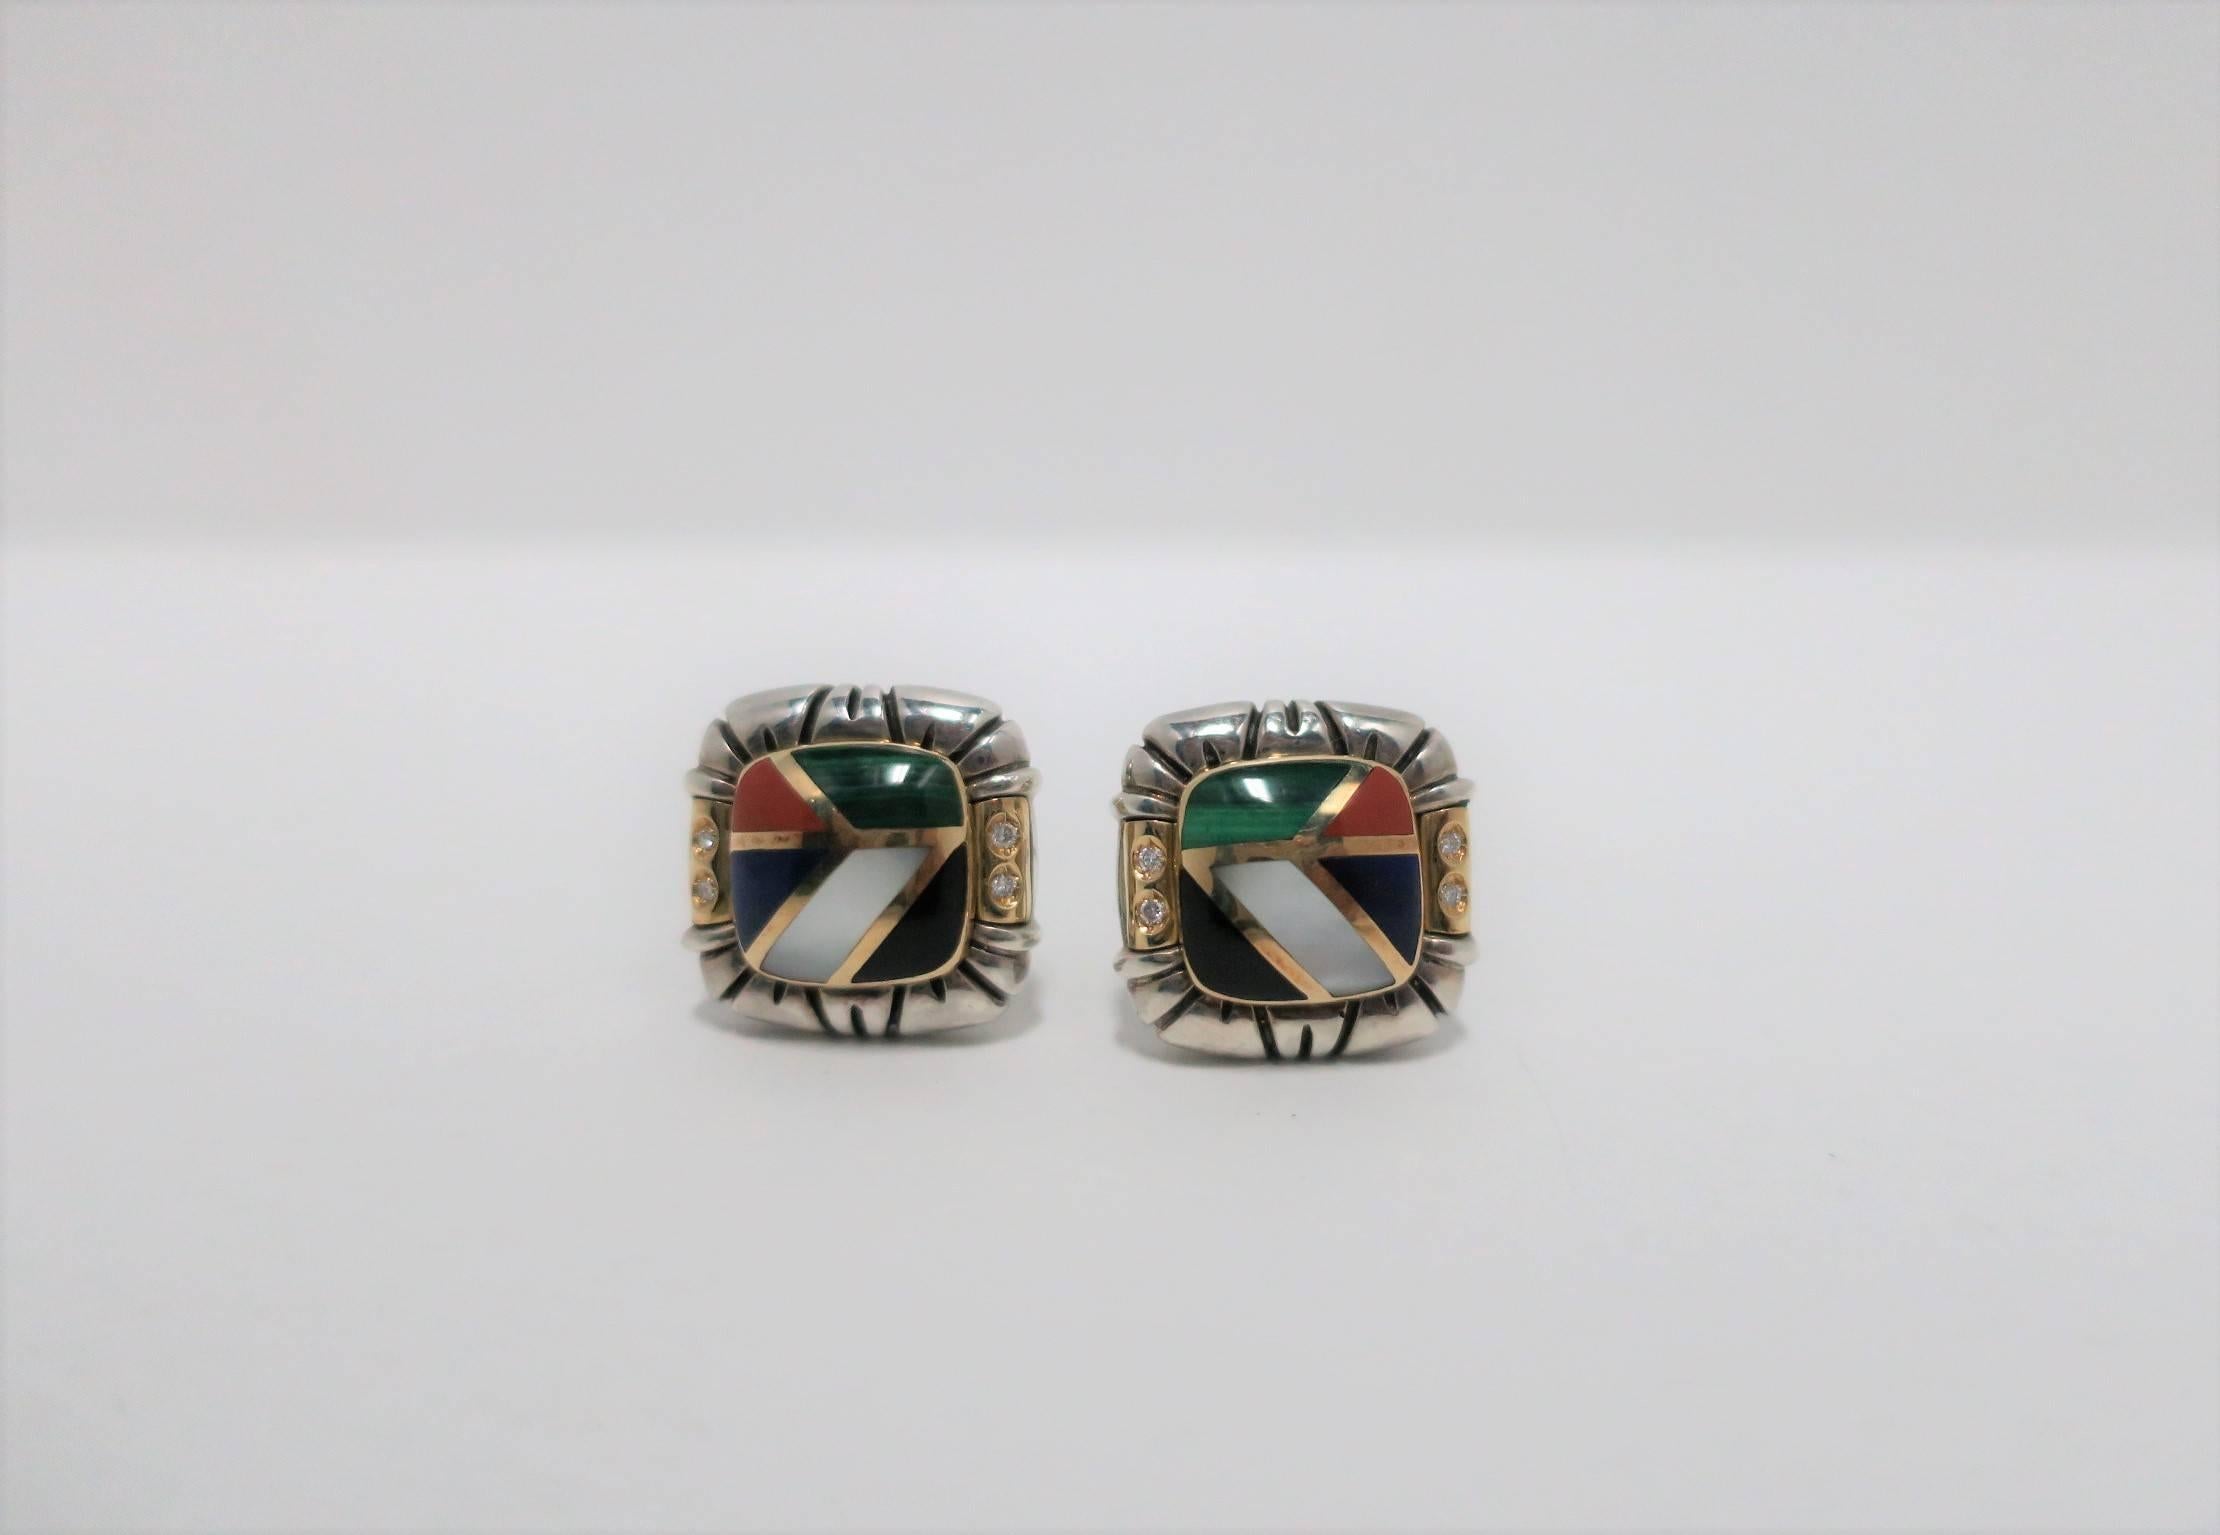 A beautiful pair of vintage designer earrings by Asch Grossbardt, circa 1990s. Earrings are inlaid and comprised of 18-karat gold, sterling silver, mother-of-pearl, black onyx, blue lapis, green malachite, red coral and diamonds (four diamonds in